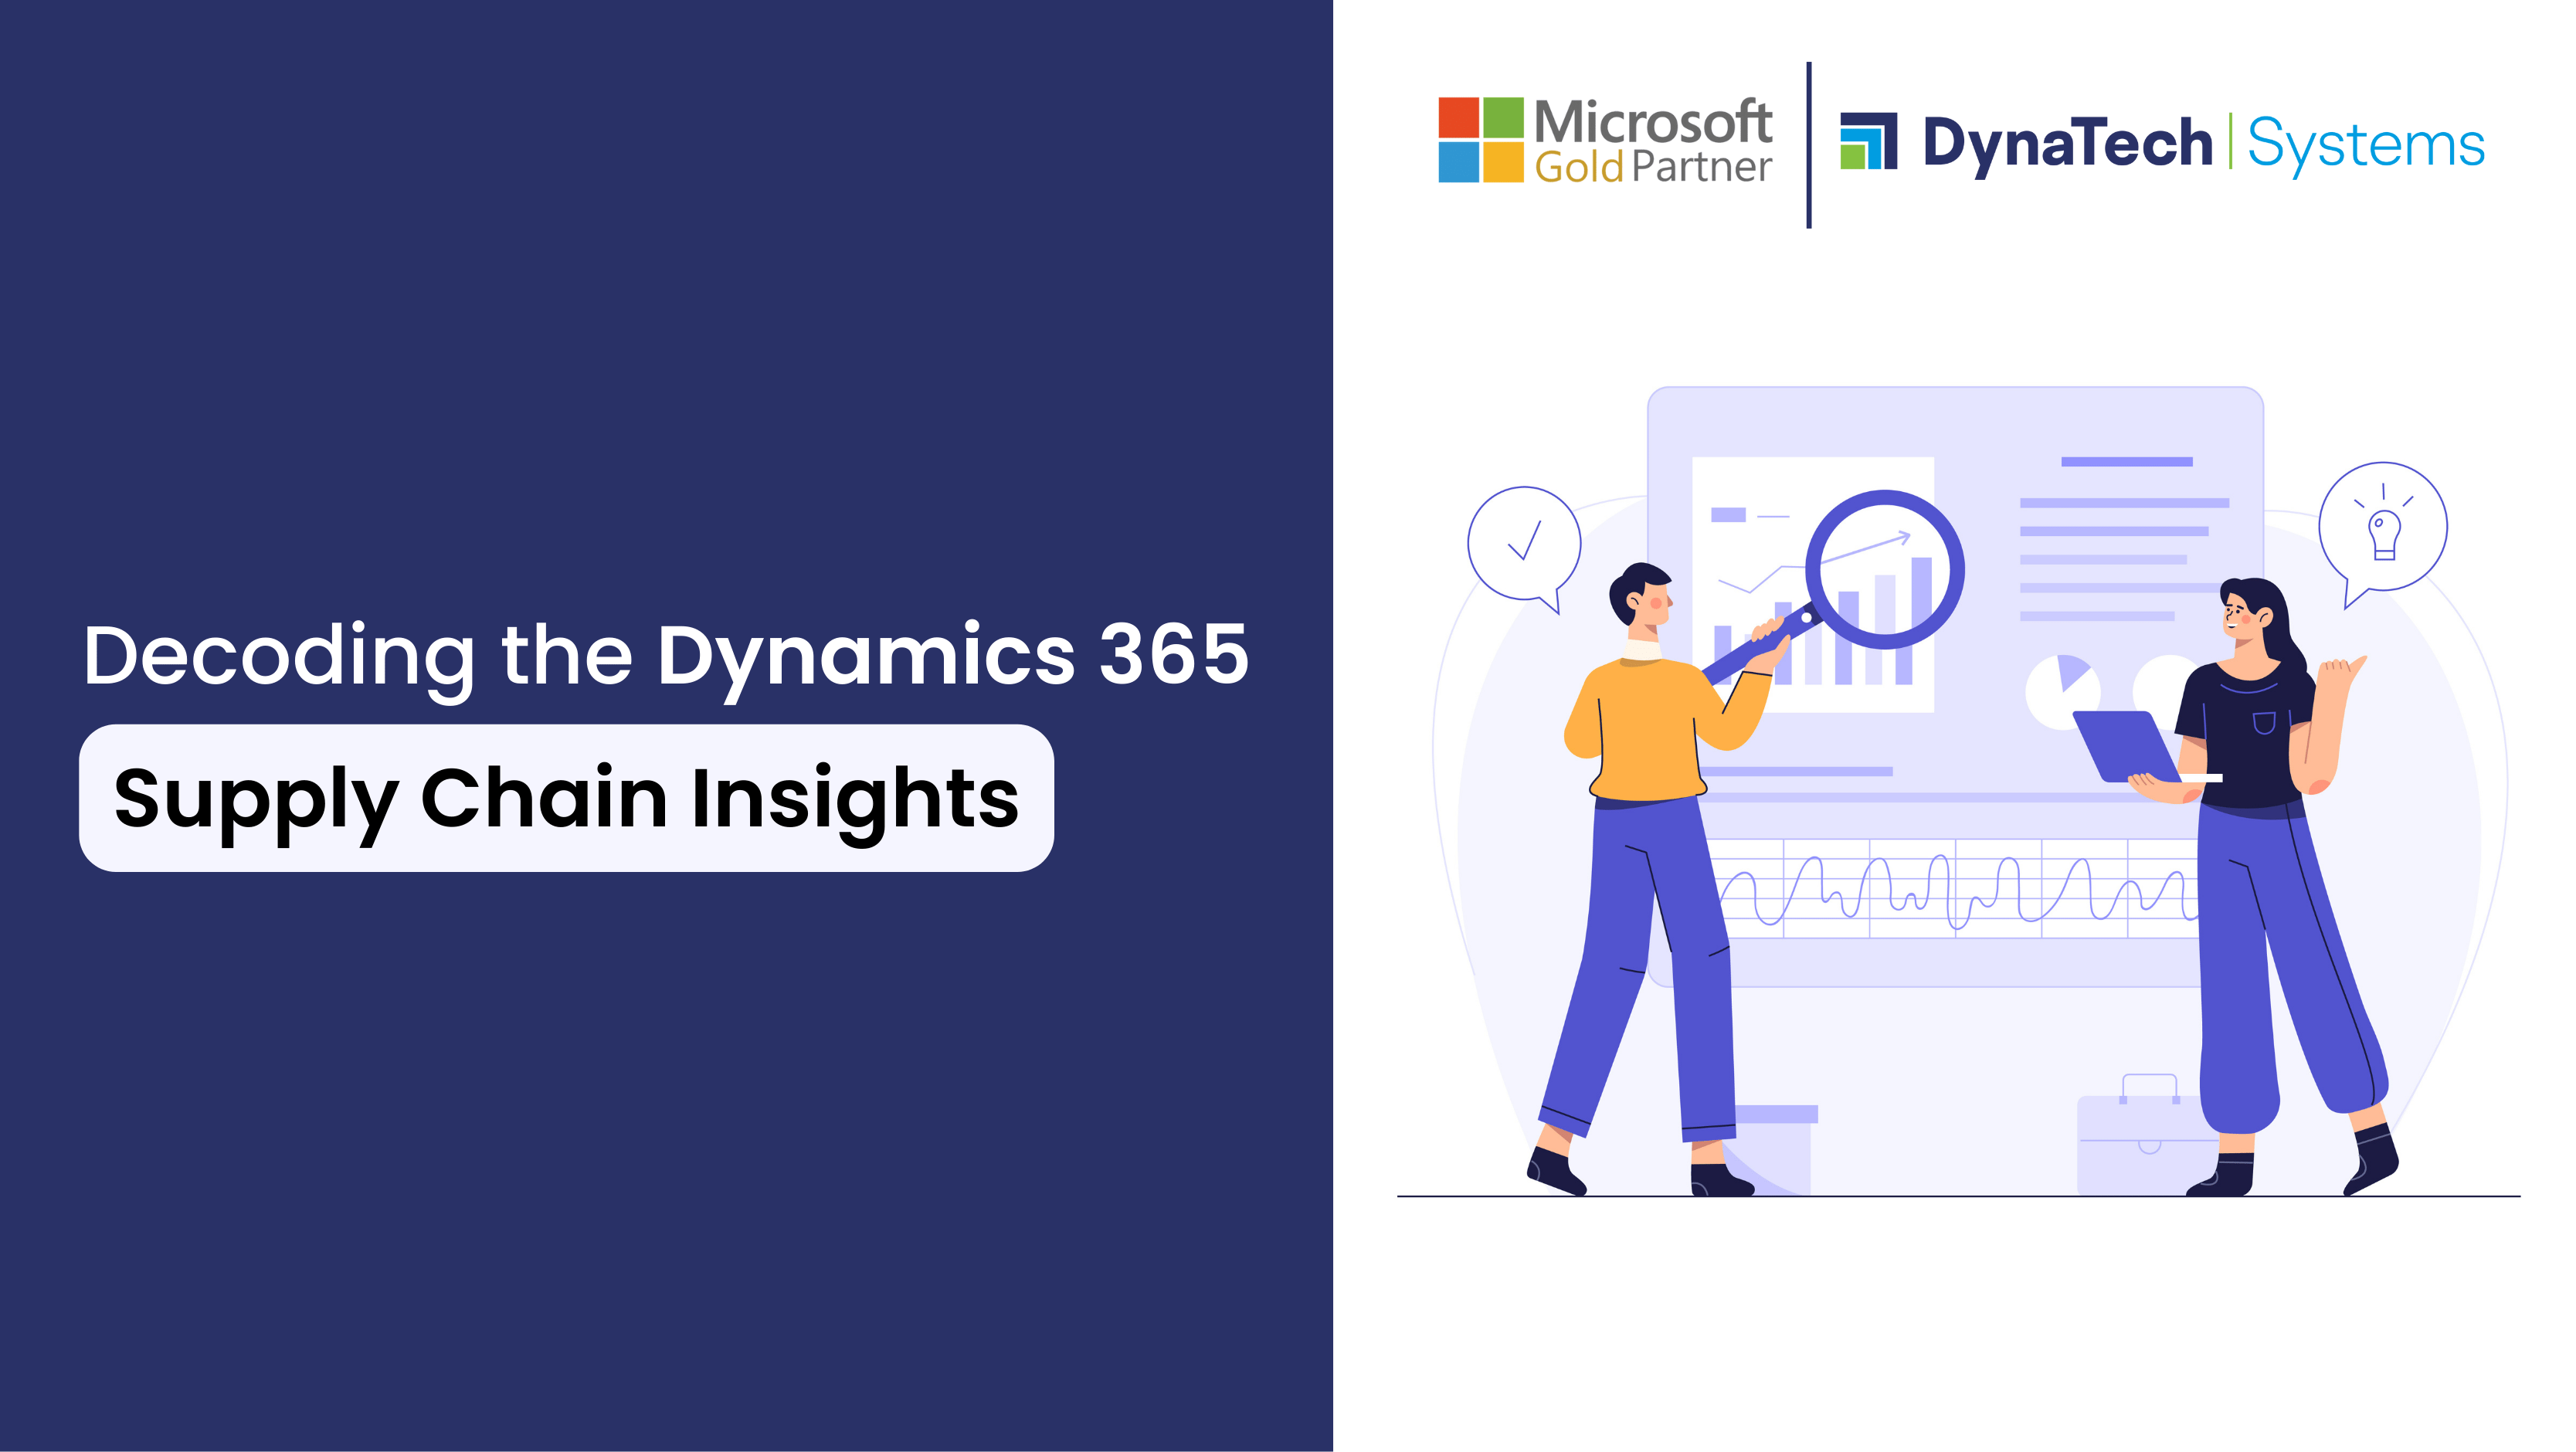 Decoding the Dynamics 365 Supply Chain Insights